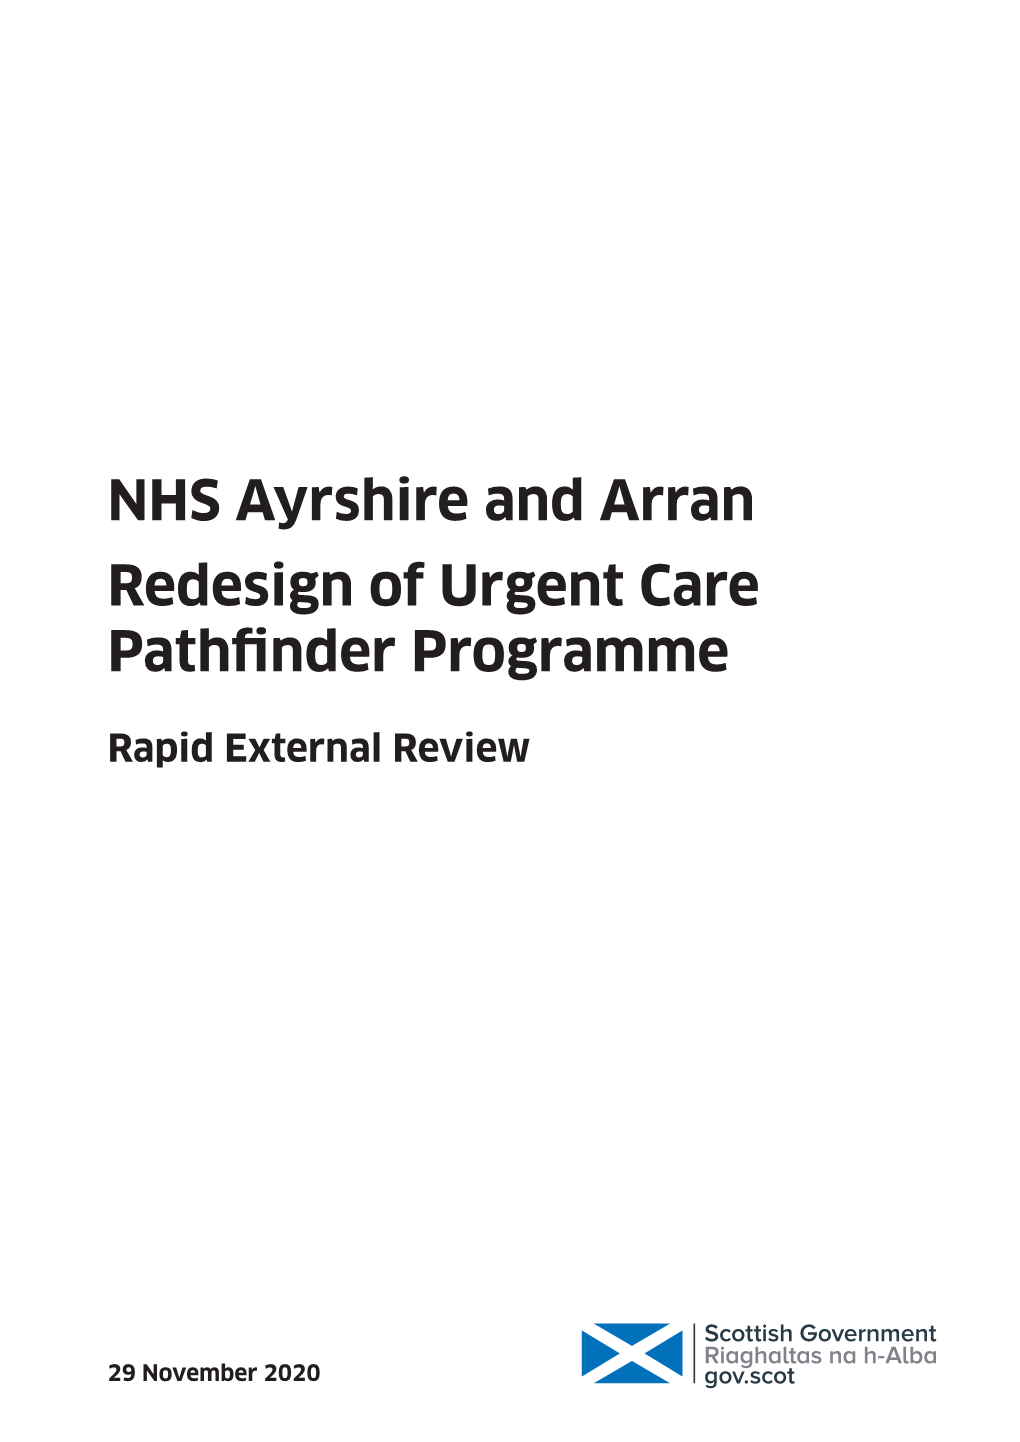 NHS Ayrshire and Arran Redesign of Urgent Care Pathfinder Programme